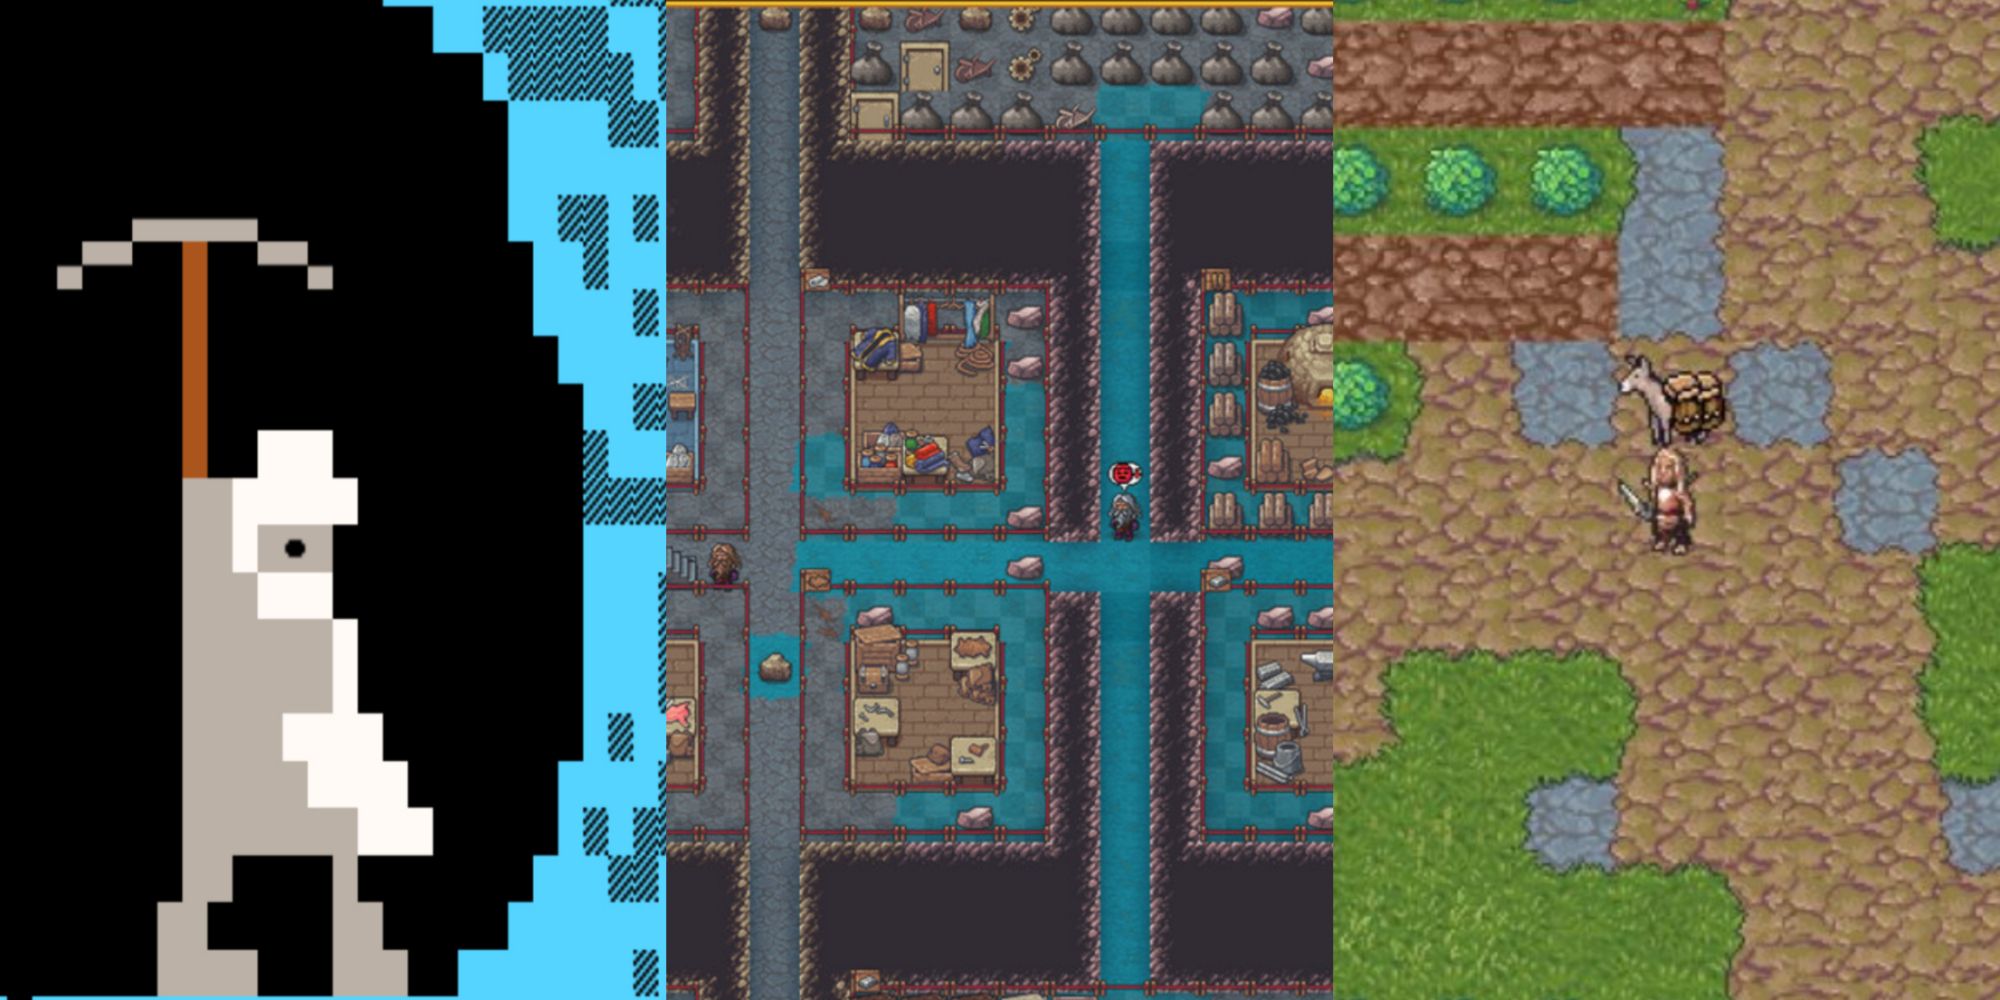 dwarf fortress bay 12 mining logo with a flooded fortress and dwarf in adventure mode